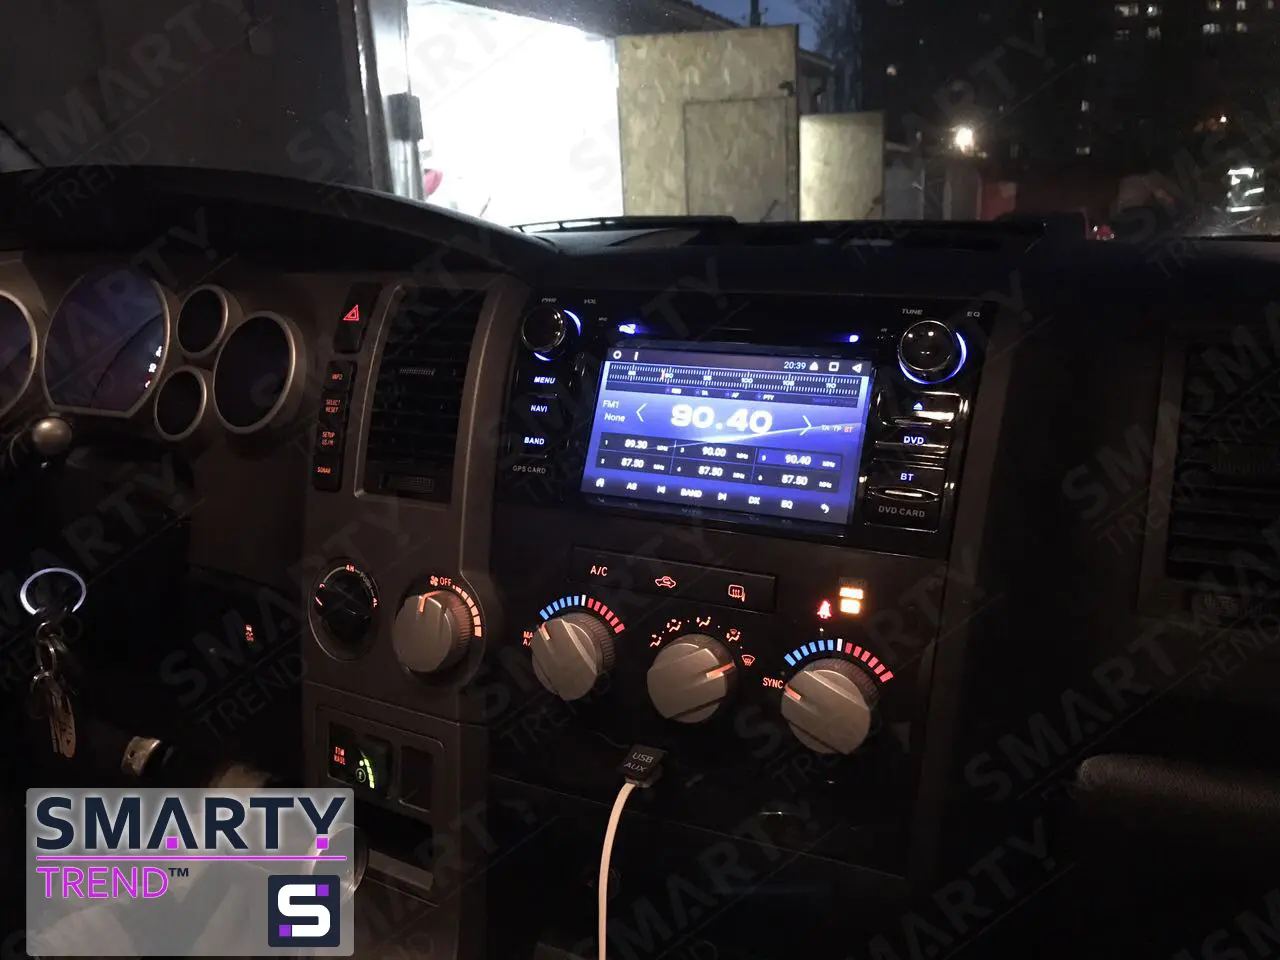 The SMARTY Trend head unit for Toyota Sequoia